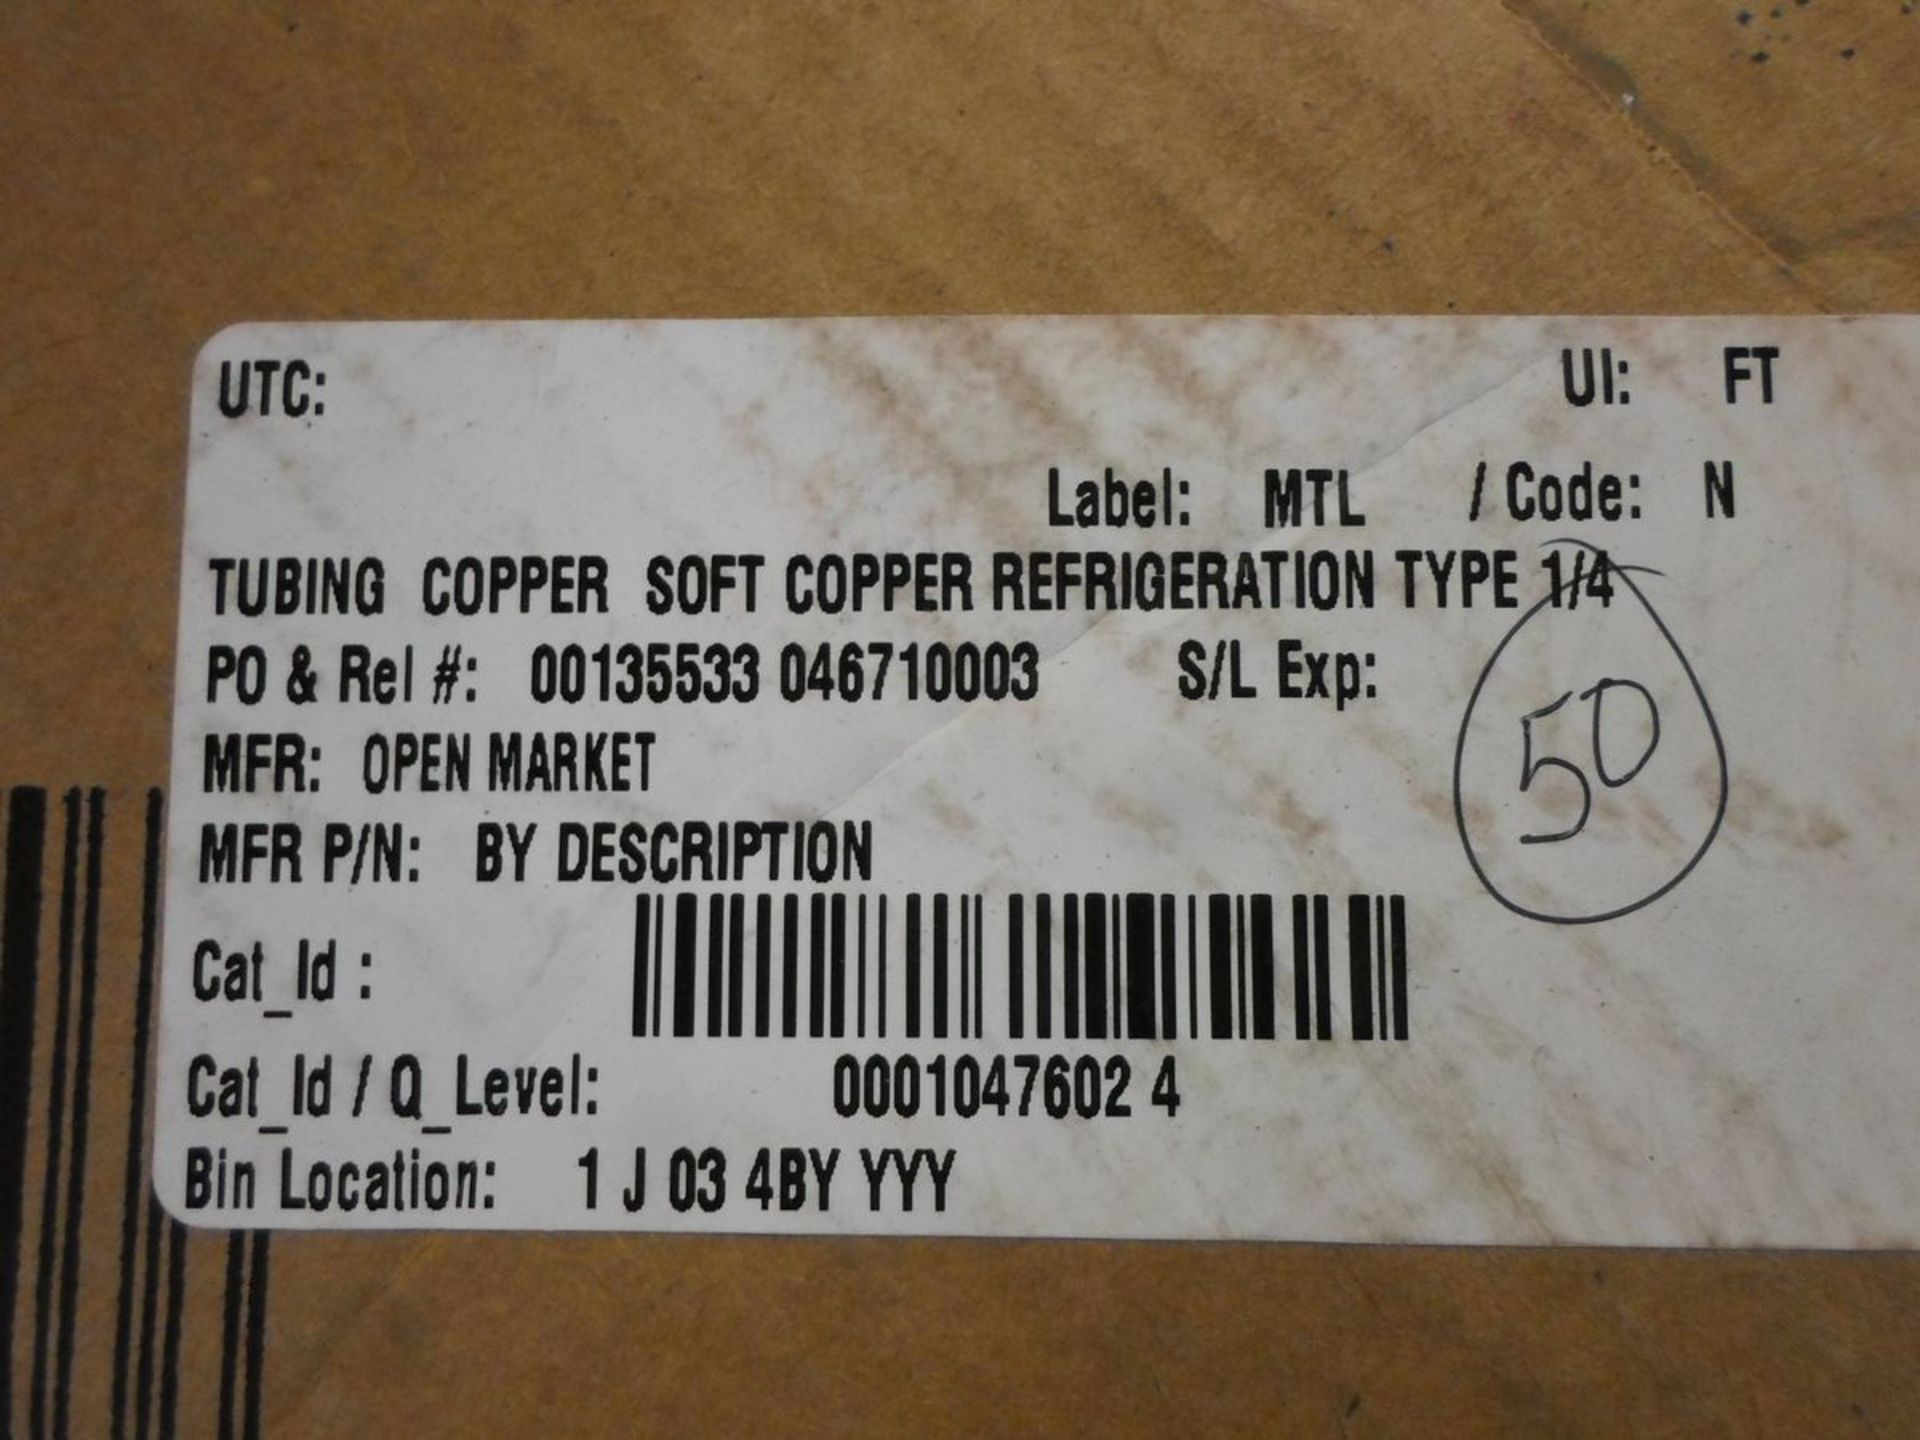 LOT OF FIVE 1/4" REFER 50' TUBING COPPER SOFT COPPER REFRIGERATION - Image 3 of 3